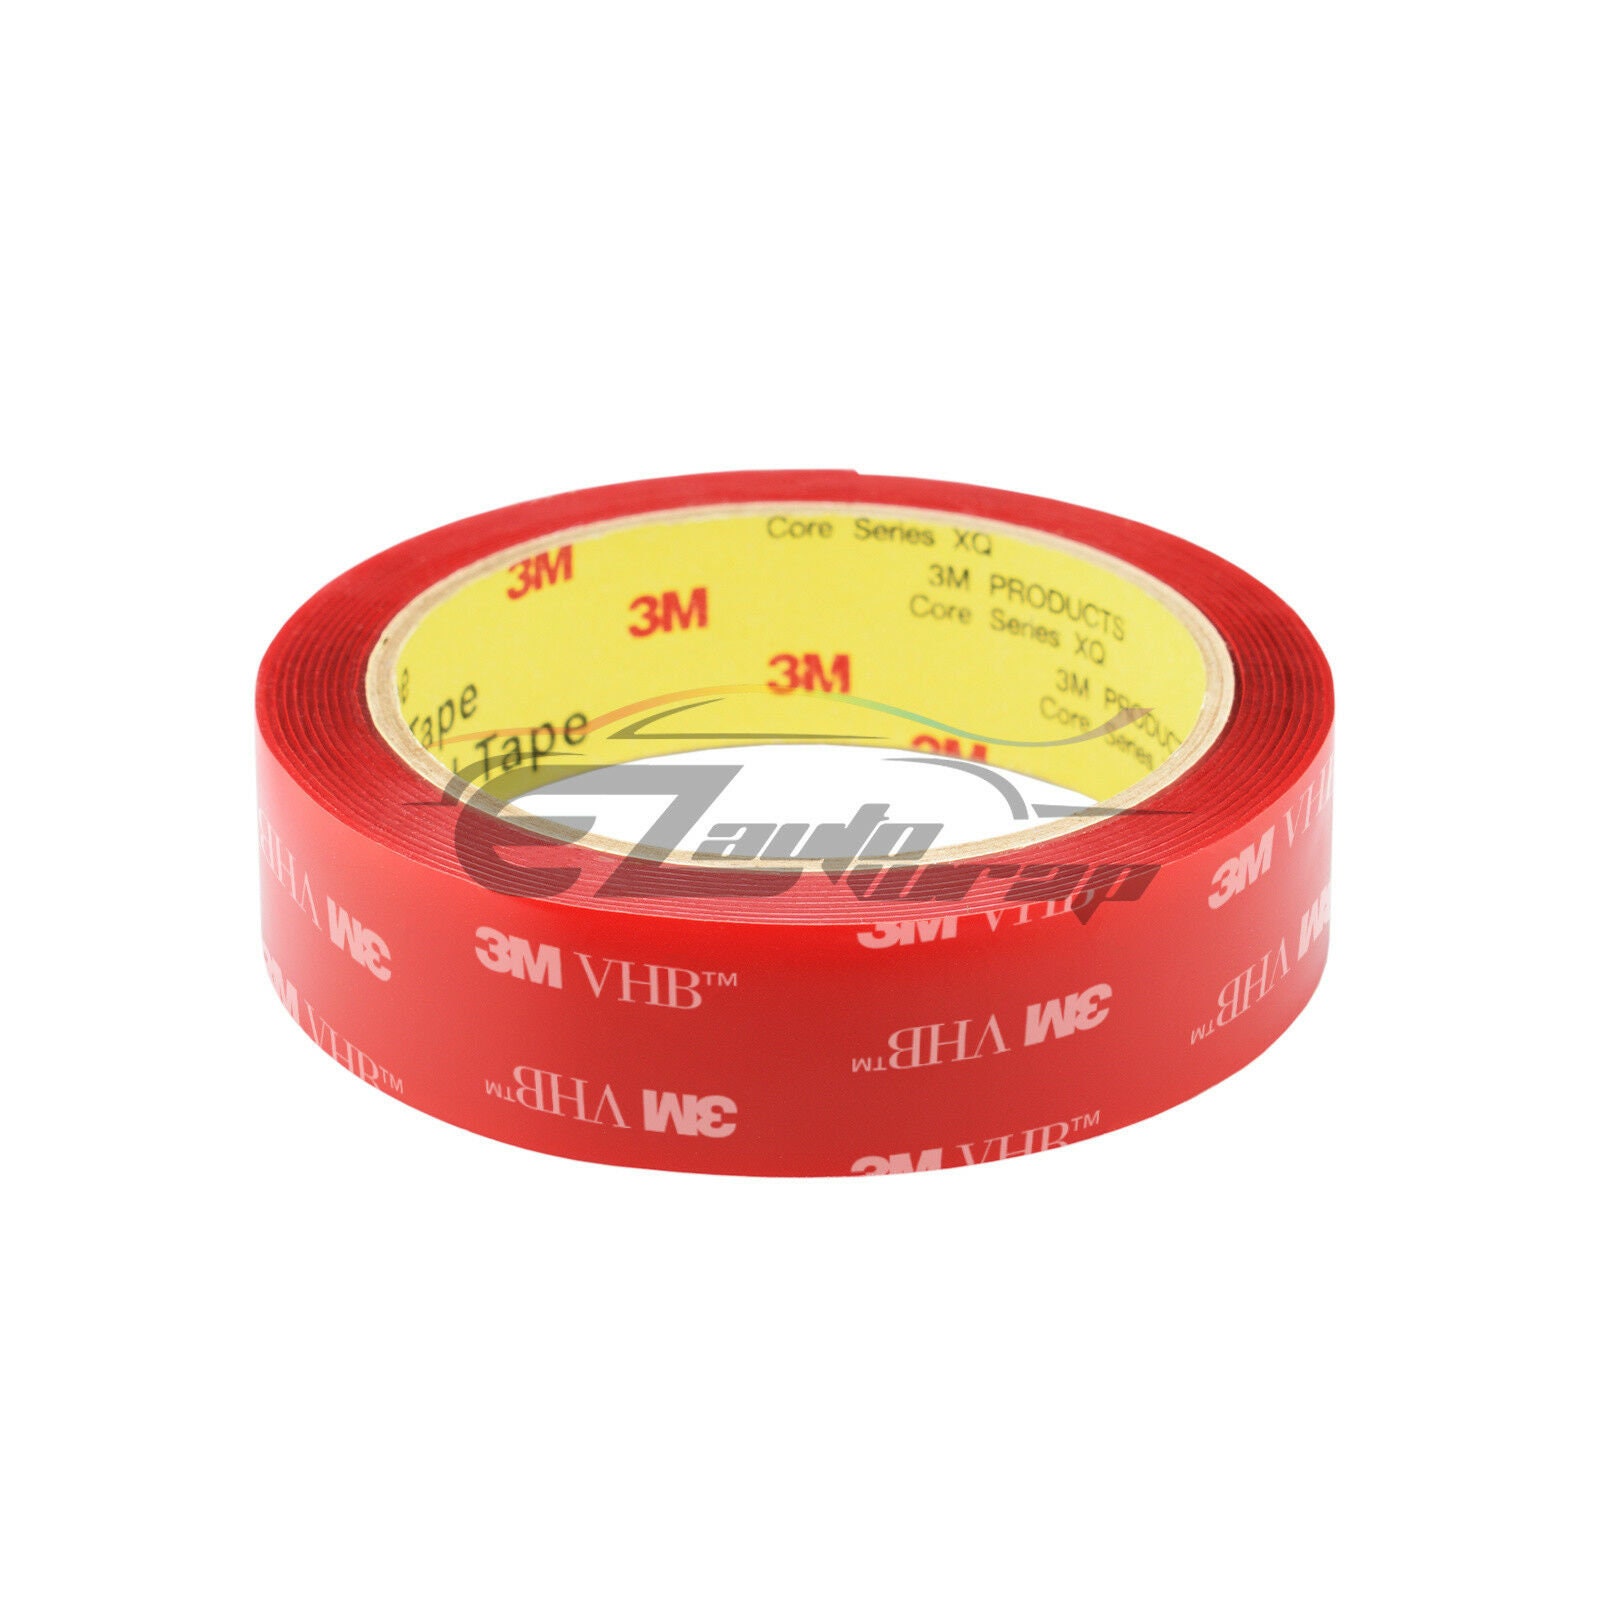 3M™ Double Sided Tape, 4905 3M™ VHB™ Tape, 20 mil